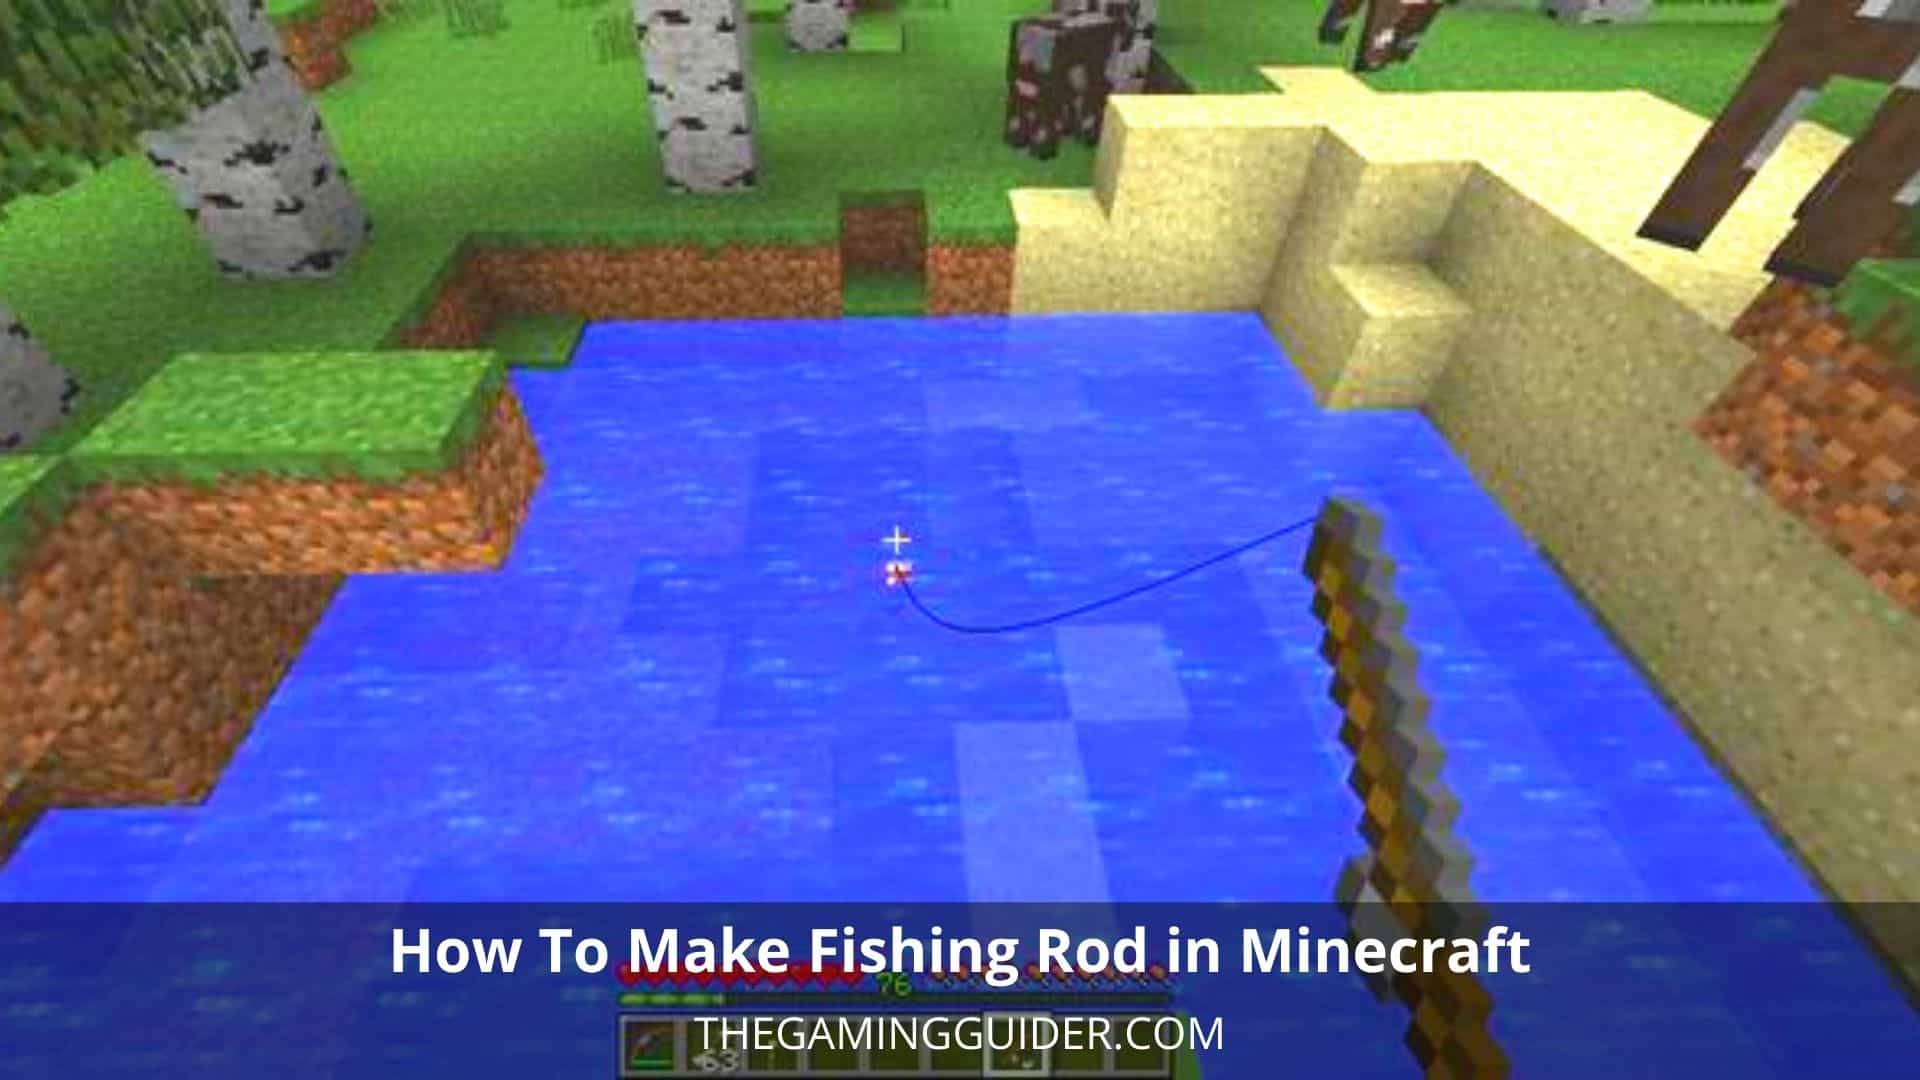 How To Make Fishing Rod in Minecraft - Perfect Escort